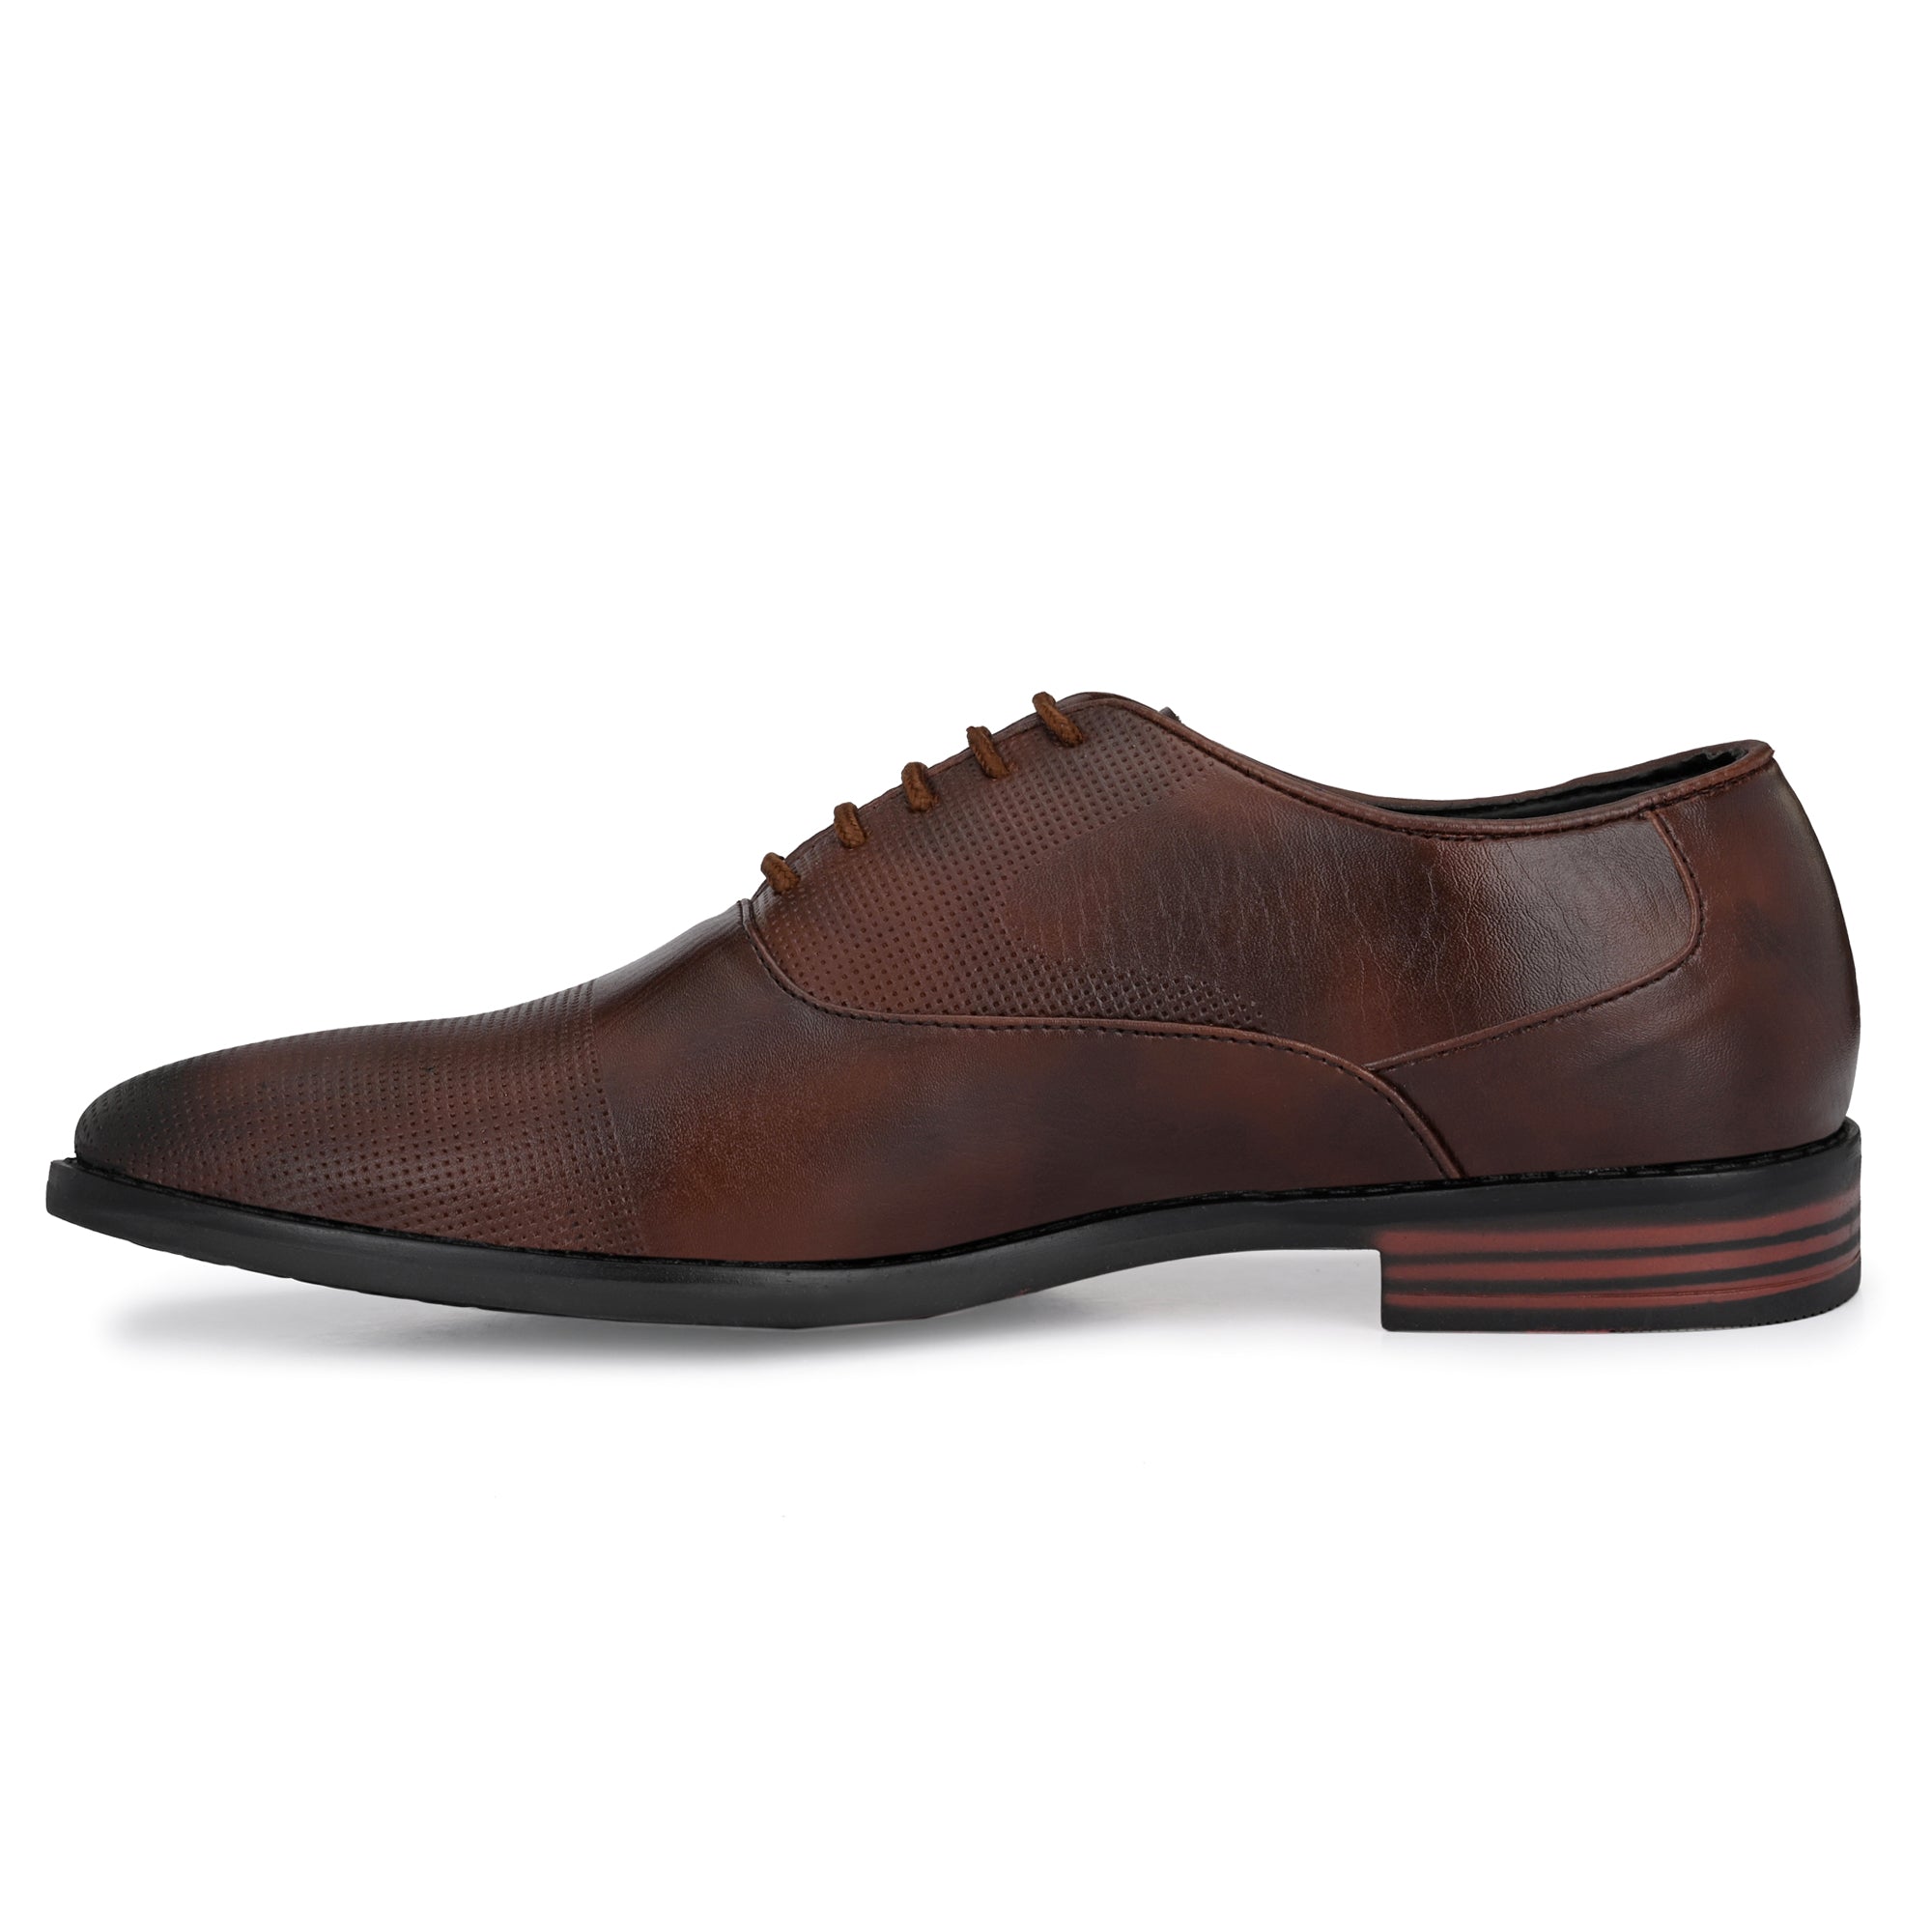 Attitudist Handcrafted Plain Oxford Matte Brown Formal Derby Shoes With Textured Toe For Men MTOBSF